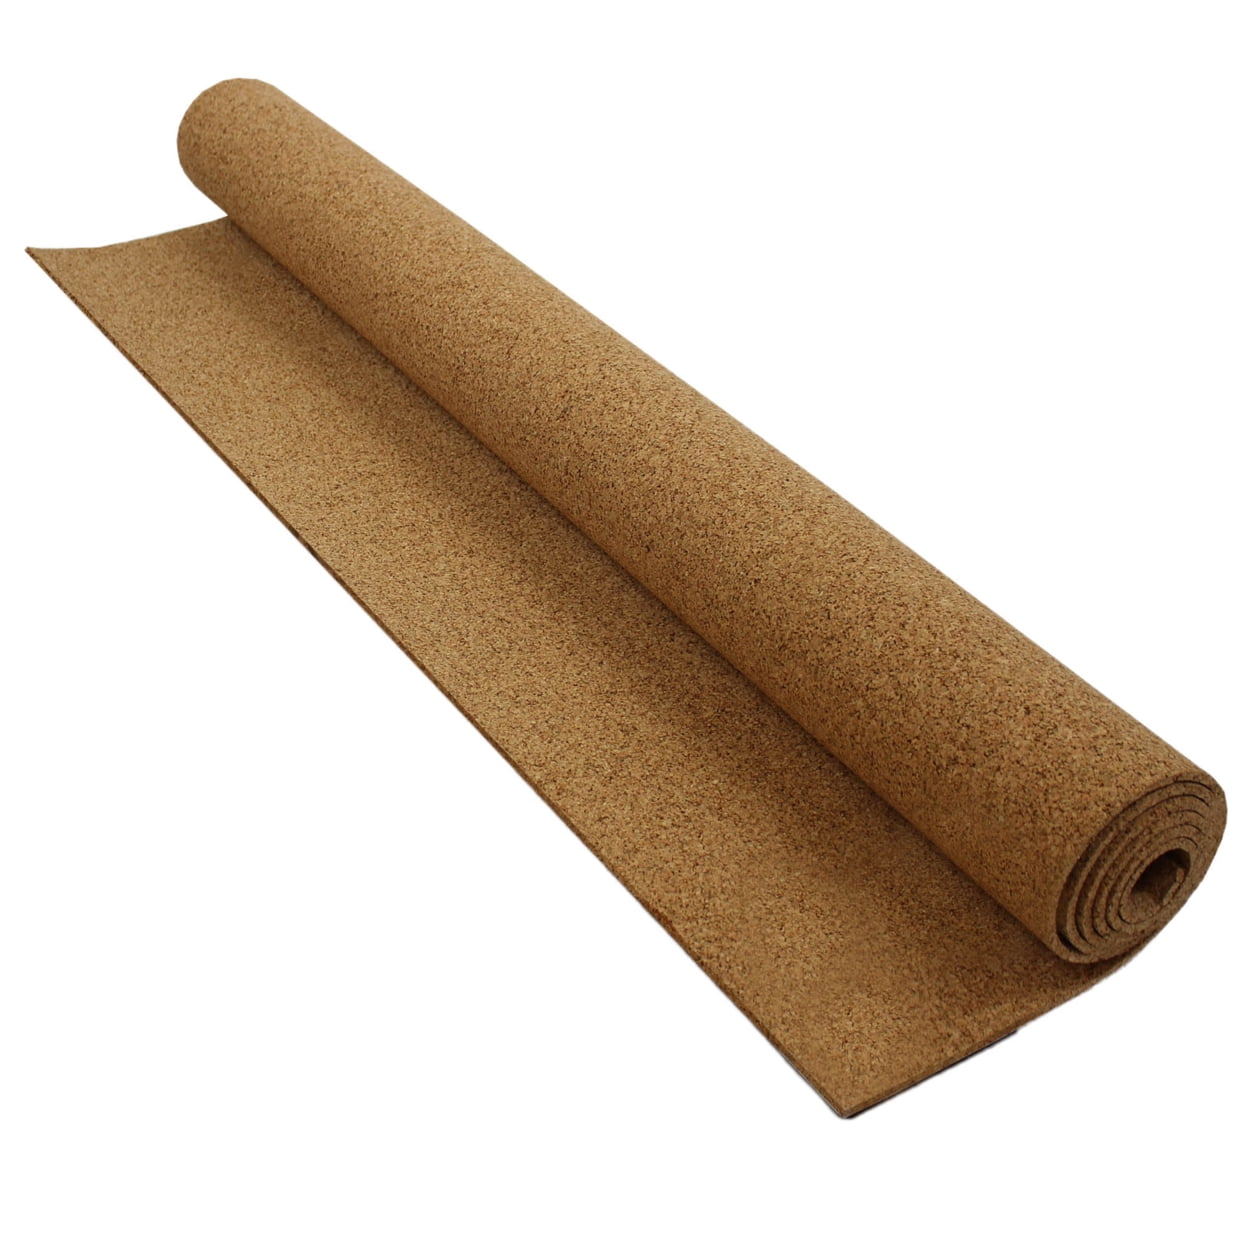 0.8-20mm Cork Roll Sheets Cork Underlayment for Wall Crafts